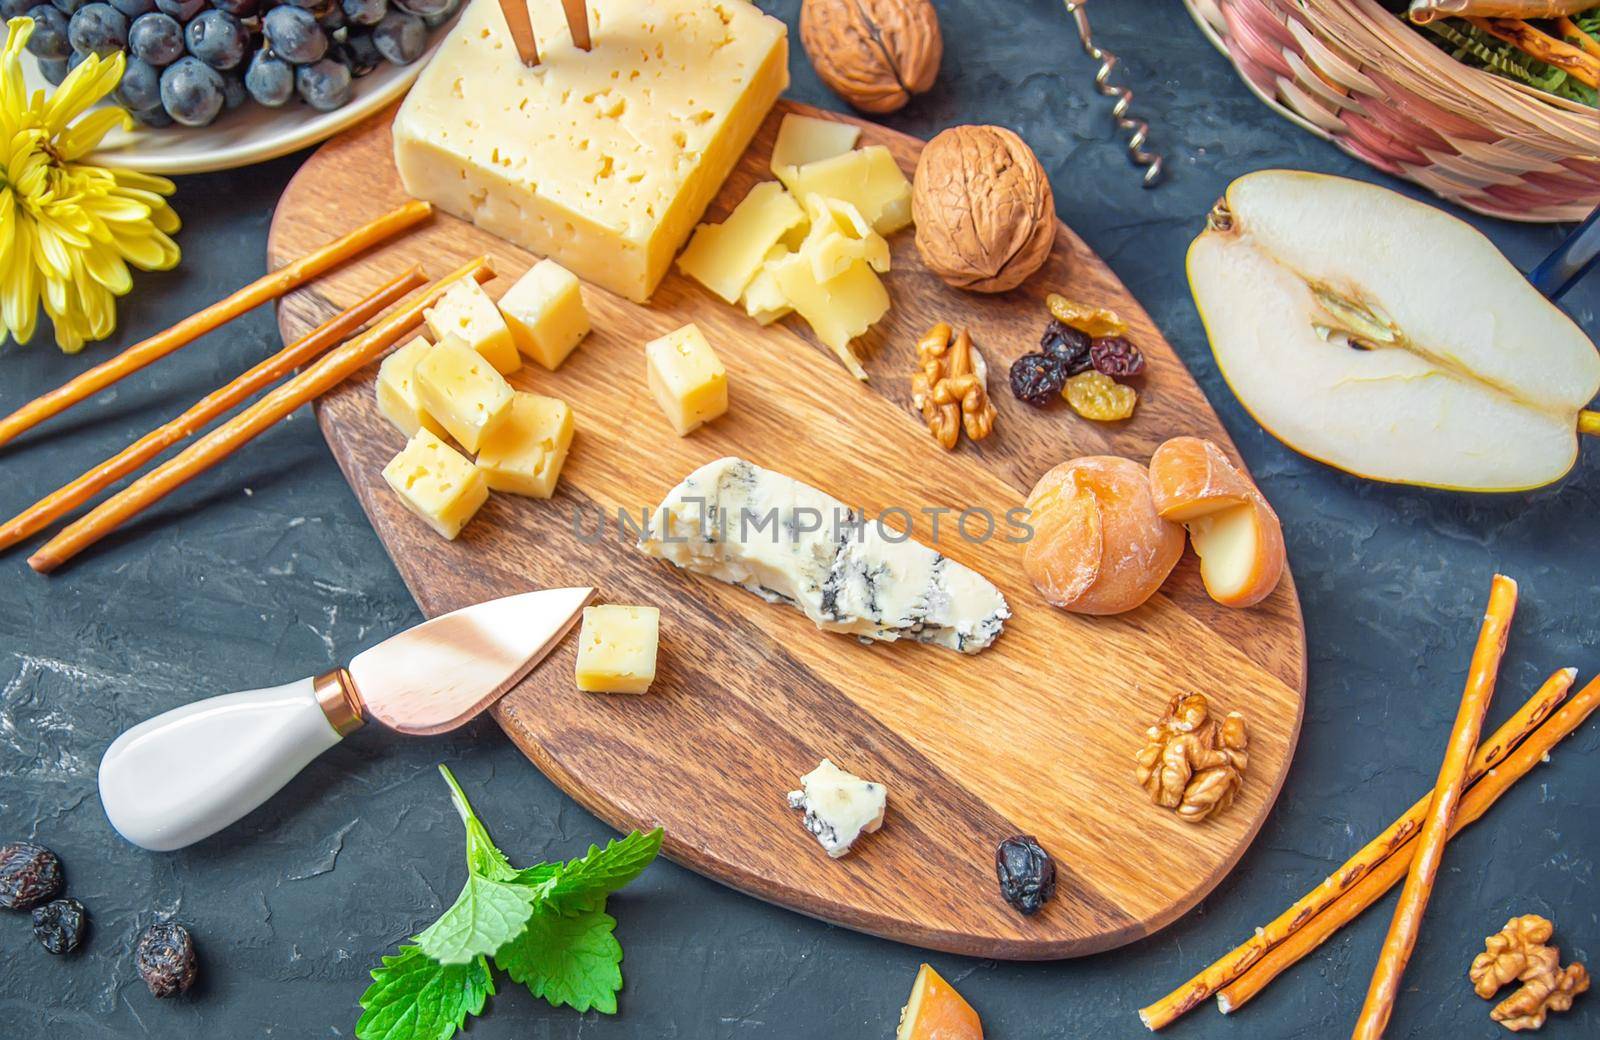 Cheese plate from different kind of cheese - Emmental, Homemade, Parmesan, blue cheese, bread sticks, walnuts, raisin, pear, grapes on black table